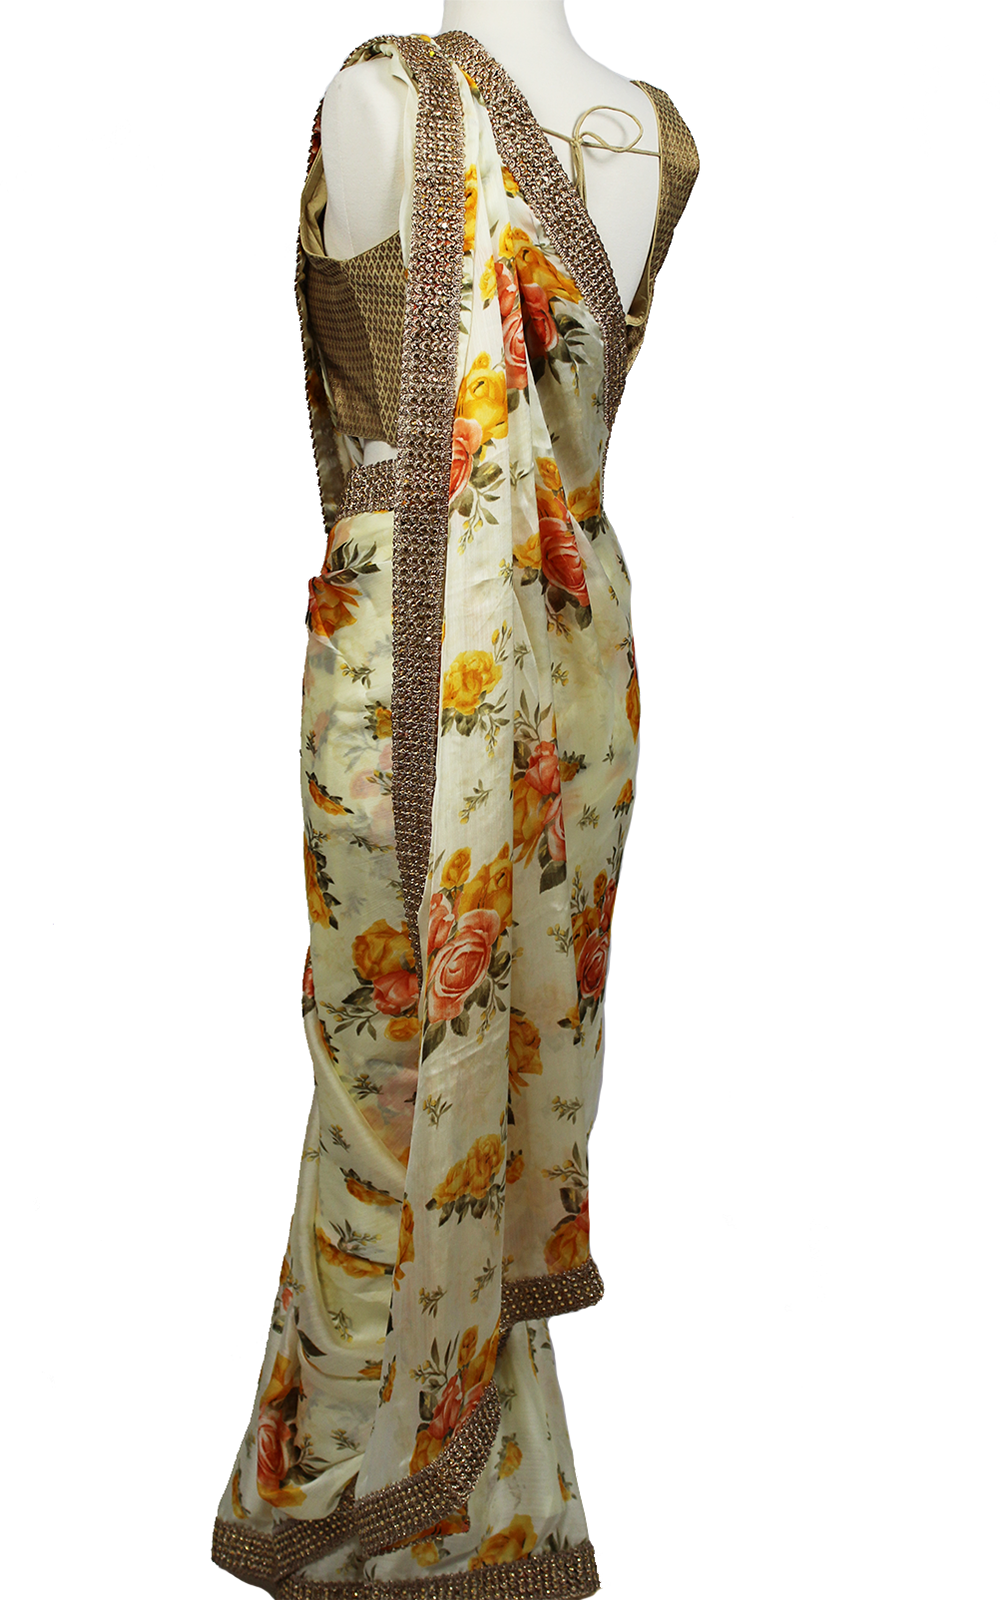 Floral Printed Saree with Gold Blouse